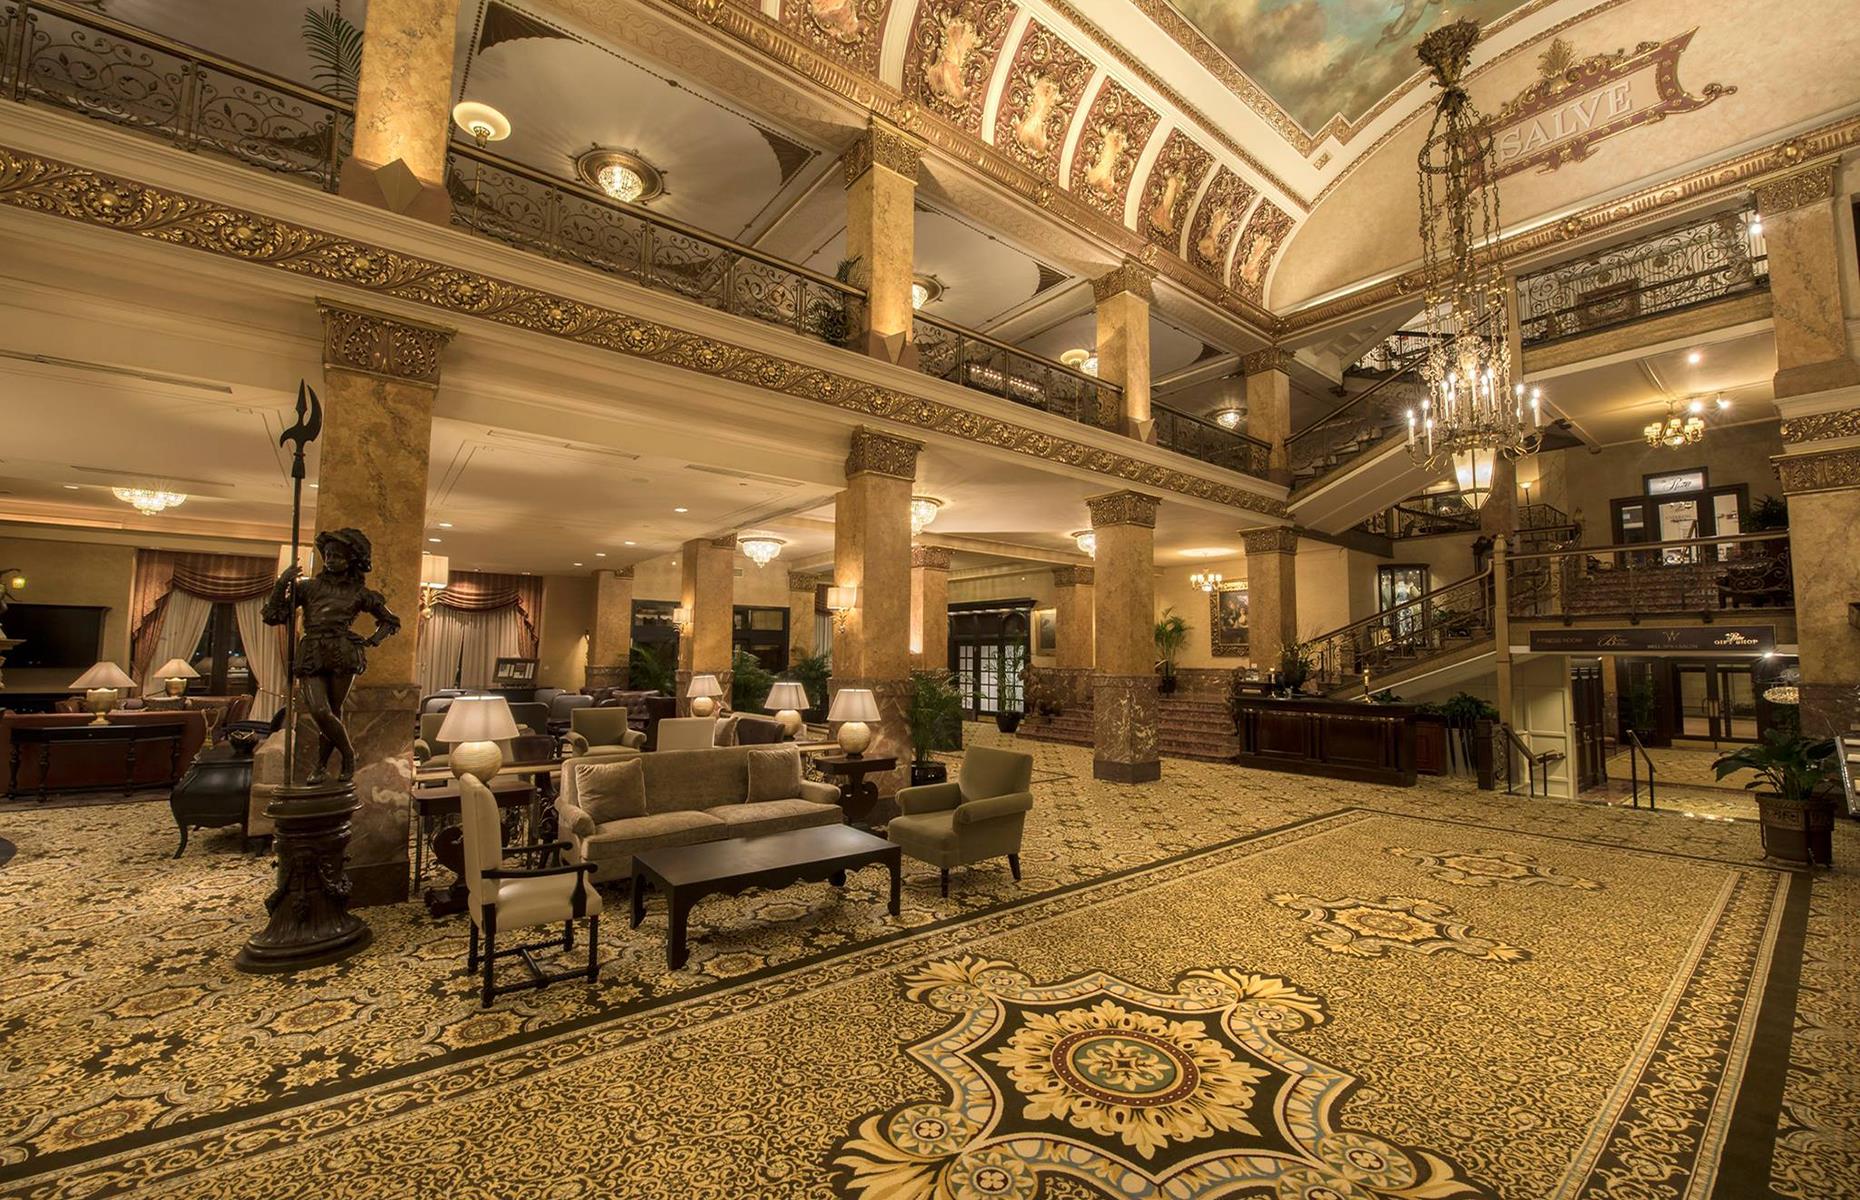 <p><a href="https://www.booking.com/hotel/us/the-pfister.en-gb.html?aid=1280739" rel="nofollow” target=">The Pfister</a> has a reputation for not letting MLB players enjoying a restorative night's sleep. Many sports stars over the years have confirmed stories of hearing knocks and footsteps in the room, seeing apparitions and TV channels flickering. <a href="https://www.mlb.com/cut4/haunted-baseball-stories-from-pfister-hotel/c-298043052">Carlos Gomez, a legendary outfielder, said</a>: "I'm scared to go there. They should change the hotel. Everybody doesn't like the hotel. Everything's scary." It's said that among other ghosts, the hotel is haunted by Guido Pfister's son Charles, who oversaw the hotel's completion after his father's death, still making sure the guests are comfortable.</p>  <p><strong>Take a look at these <a href="https://www.loveexploring.com/gallerylist/84907/jaw-dropping-pictures-of-the-worlds-most-dangerous-roads">jaw-dropping images of the world's most dangerous roads</a></strong></p>